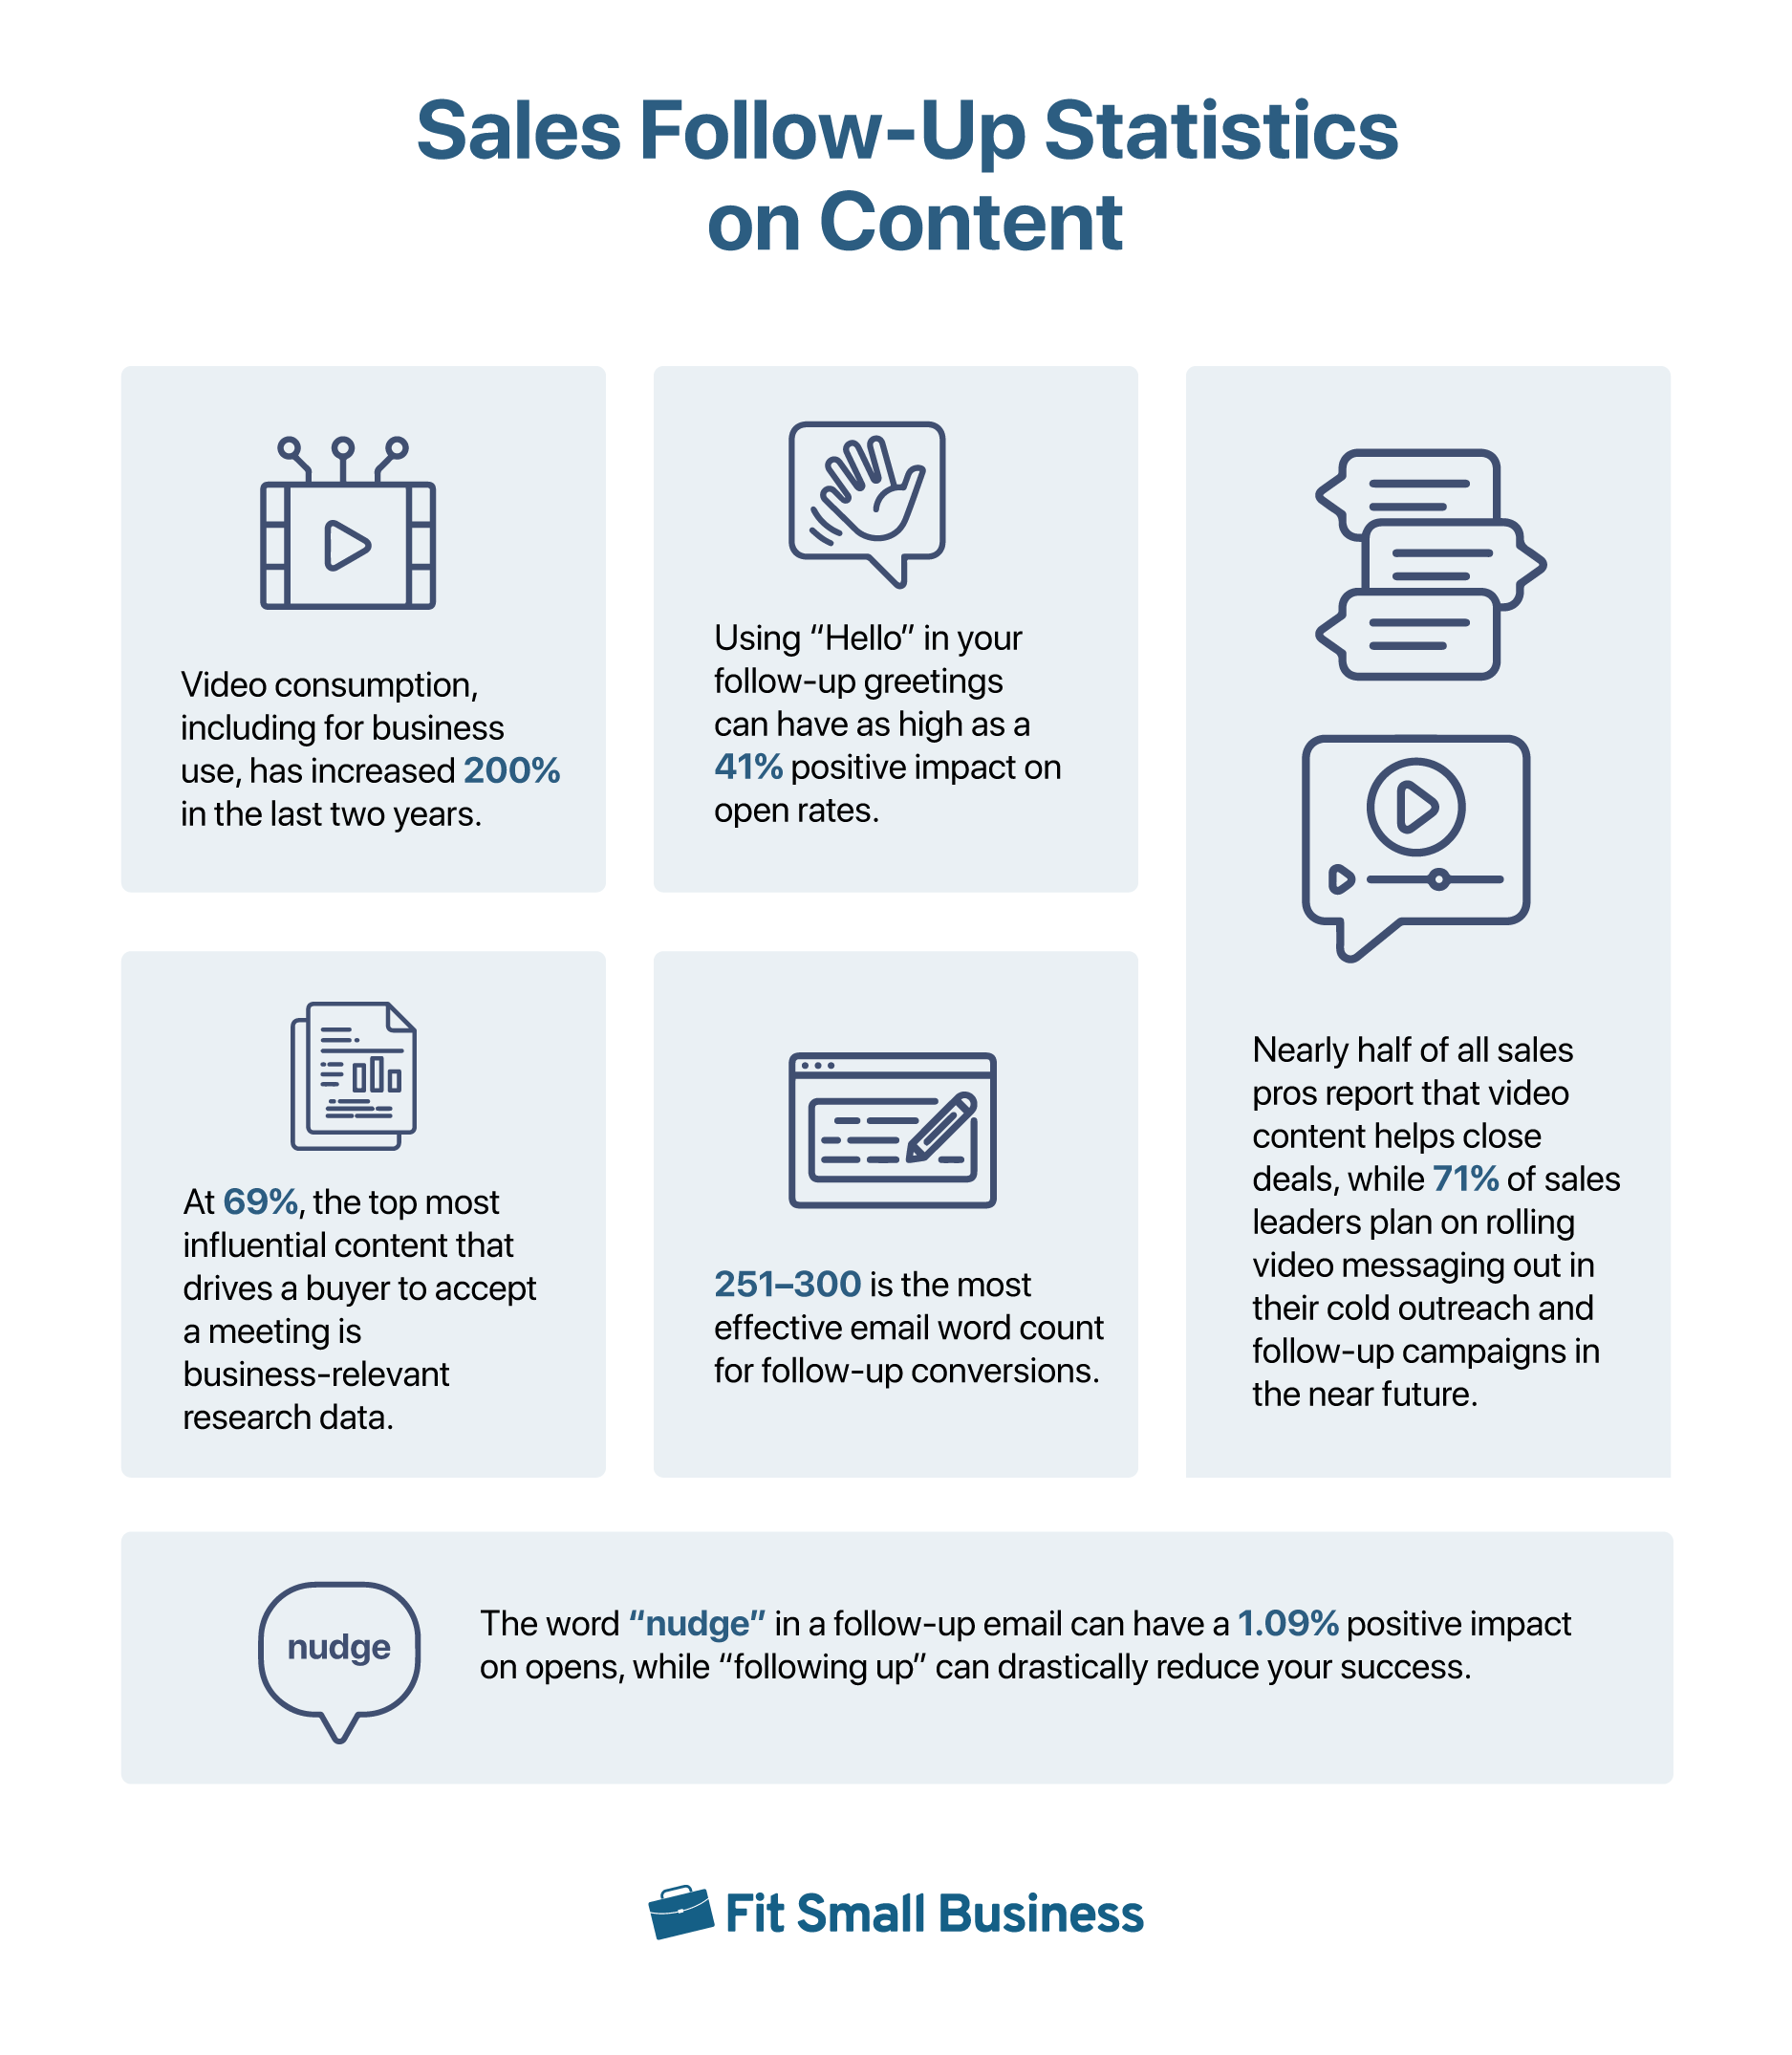 An infographic about sales follow-up statistics on content